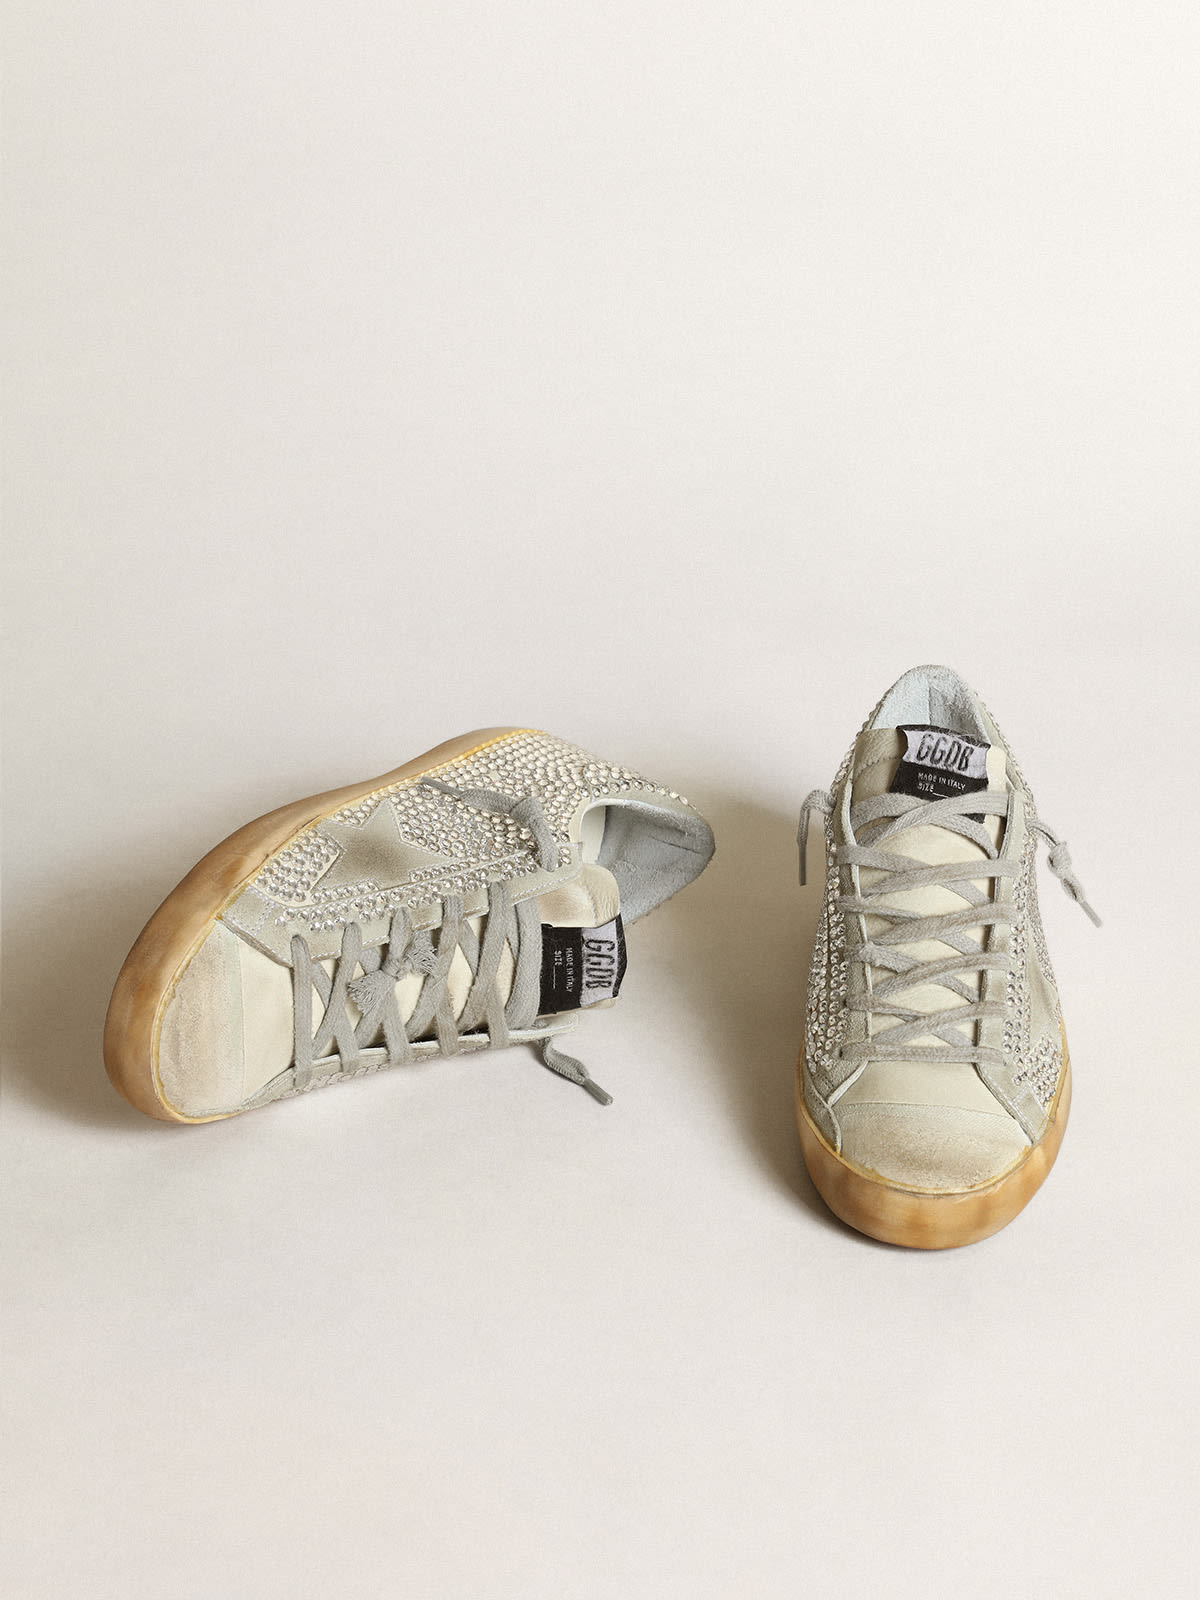 Golden Goose - Super-star sneakers in off-white nubuck and silver crystals with ice-gray suede star in 